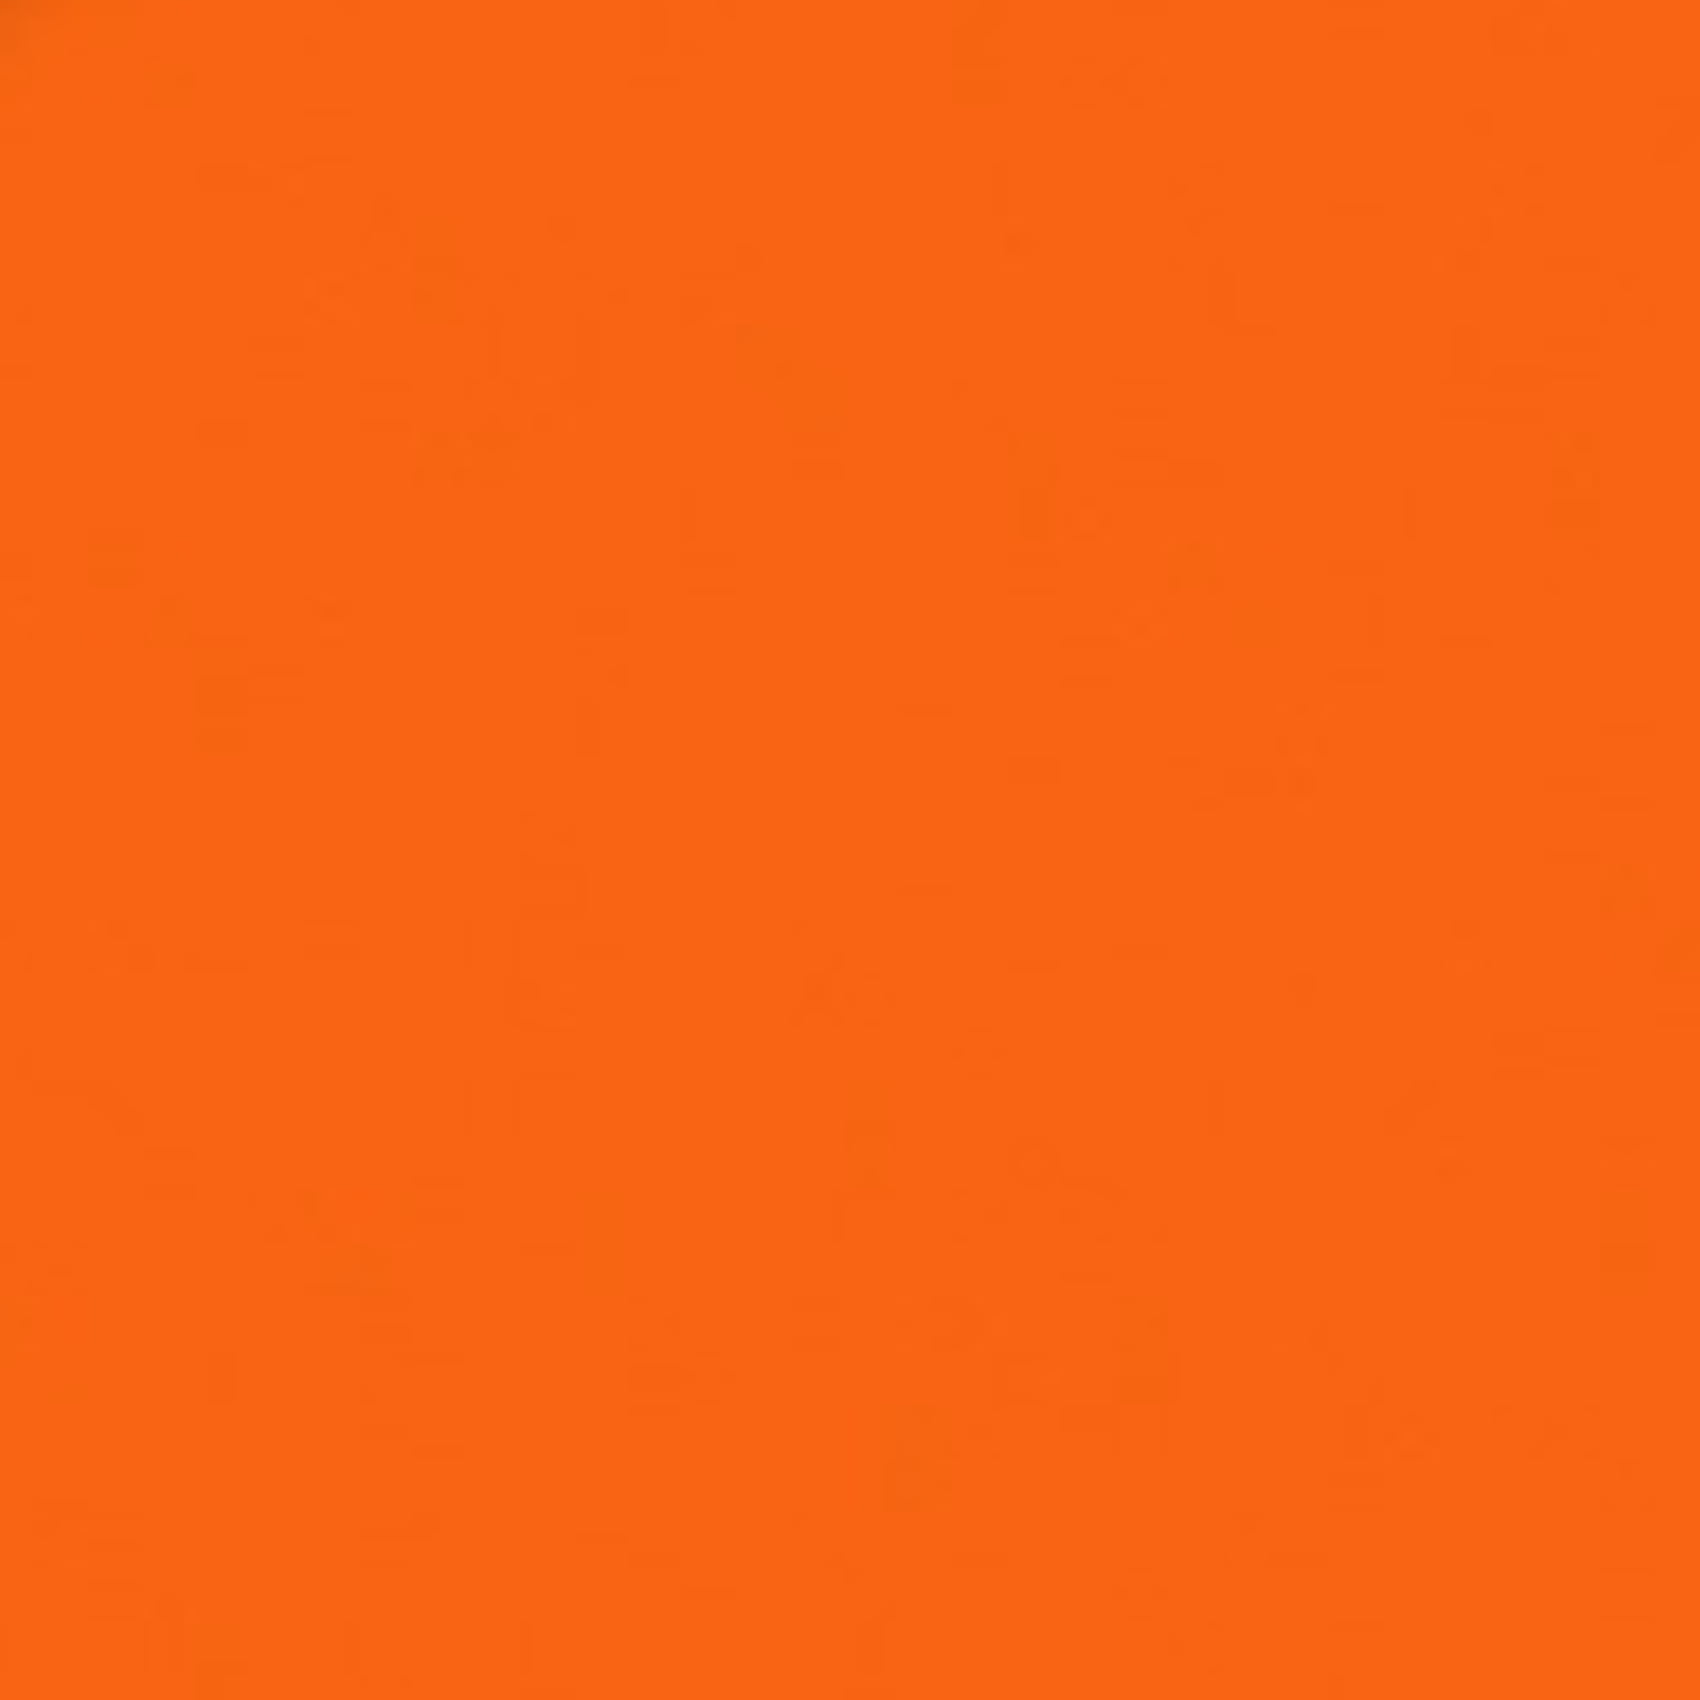 12 x 12 inch 50 Sheets 65Lb Cover Orange Cardstock Clear Path Paper 